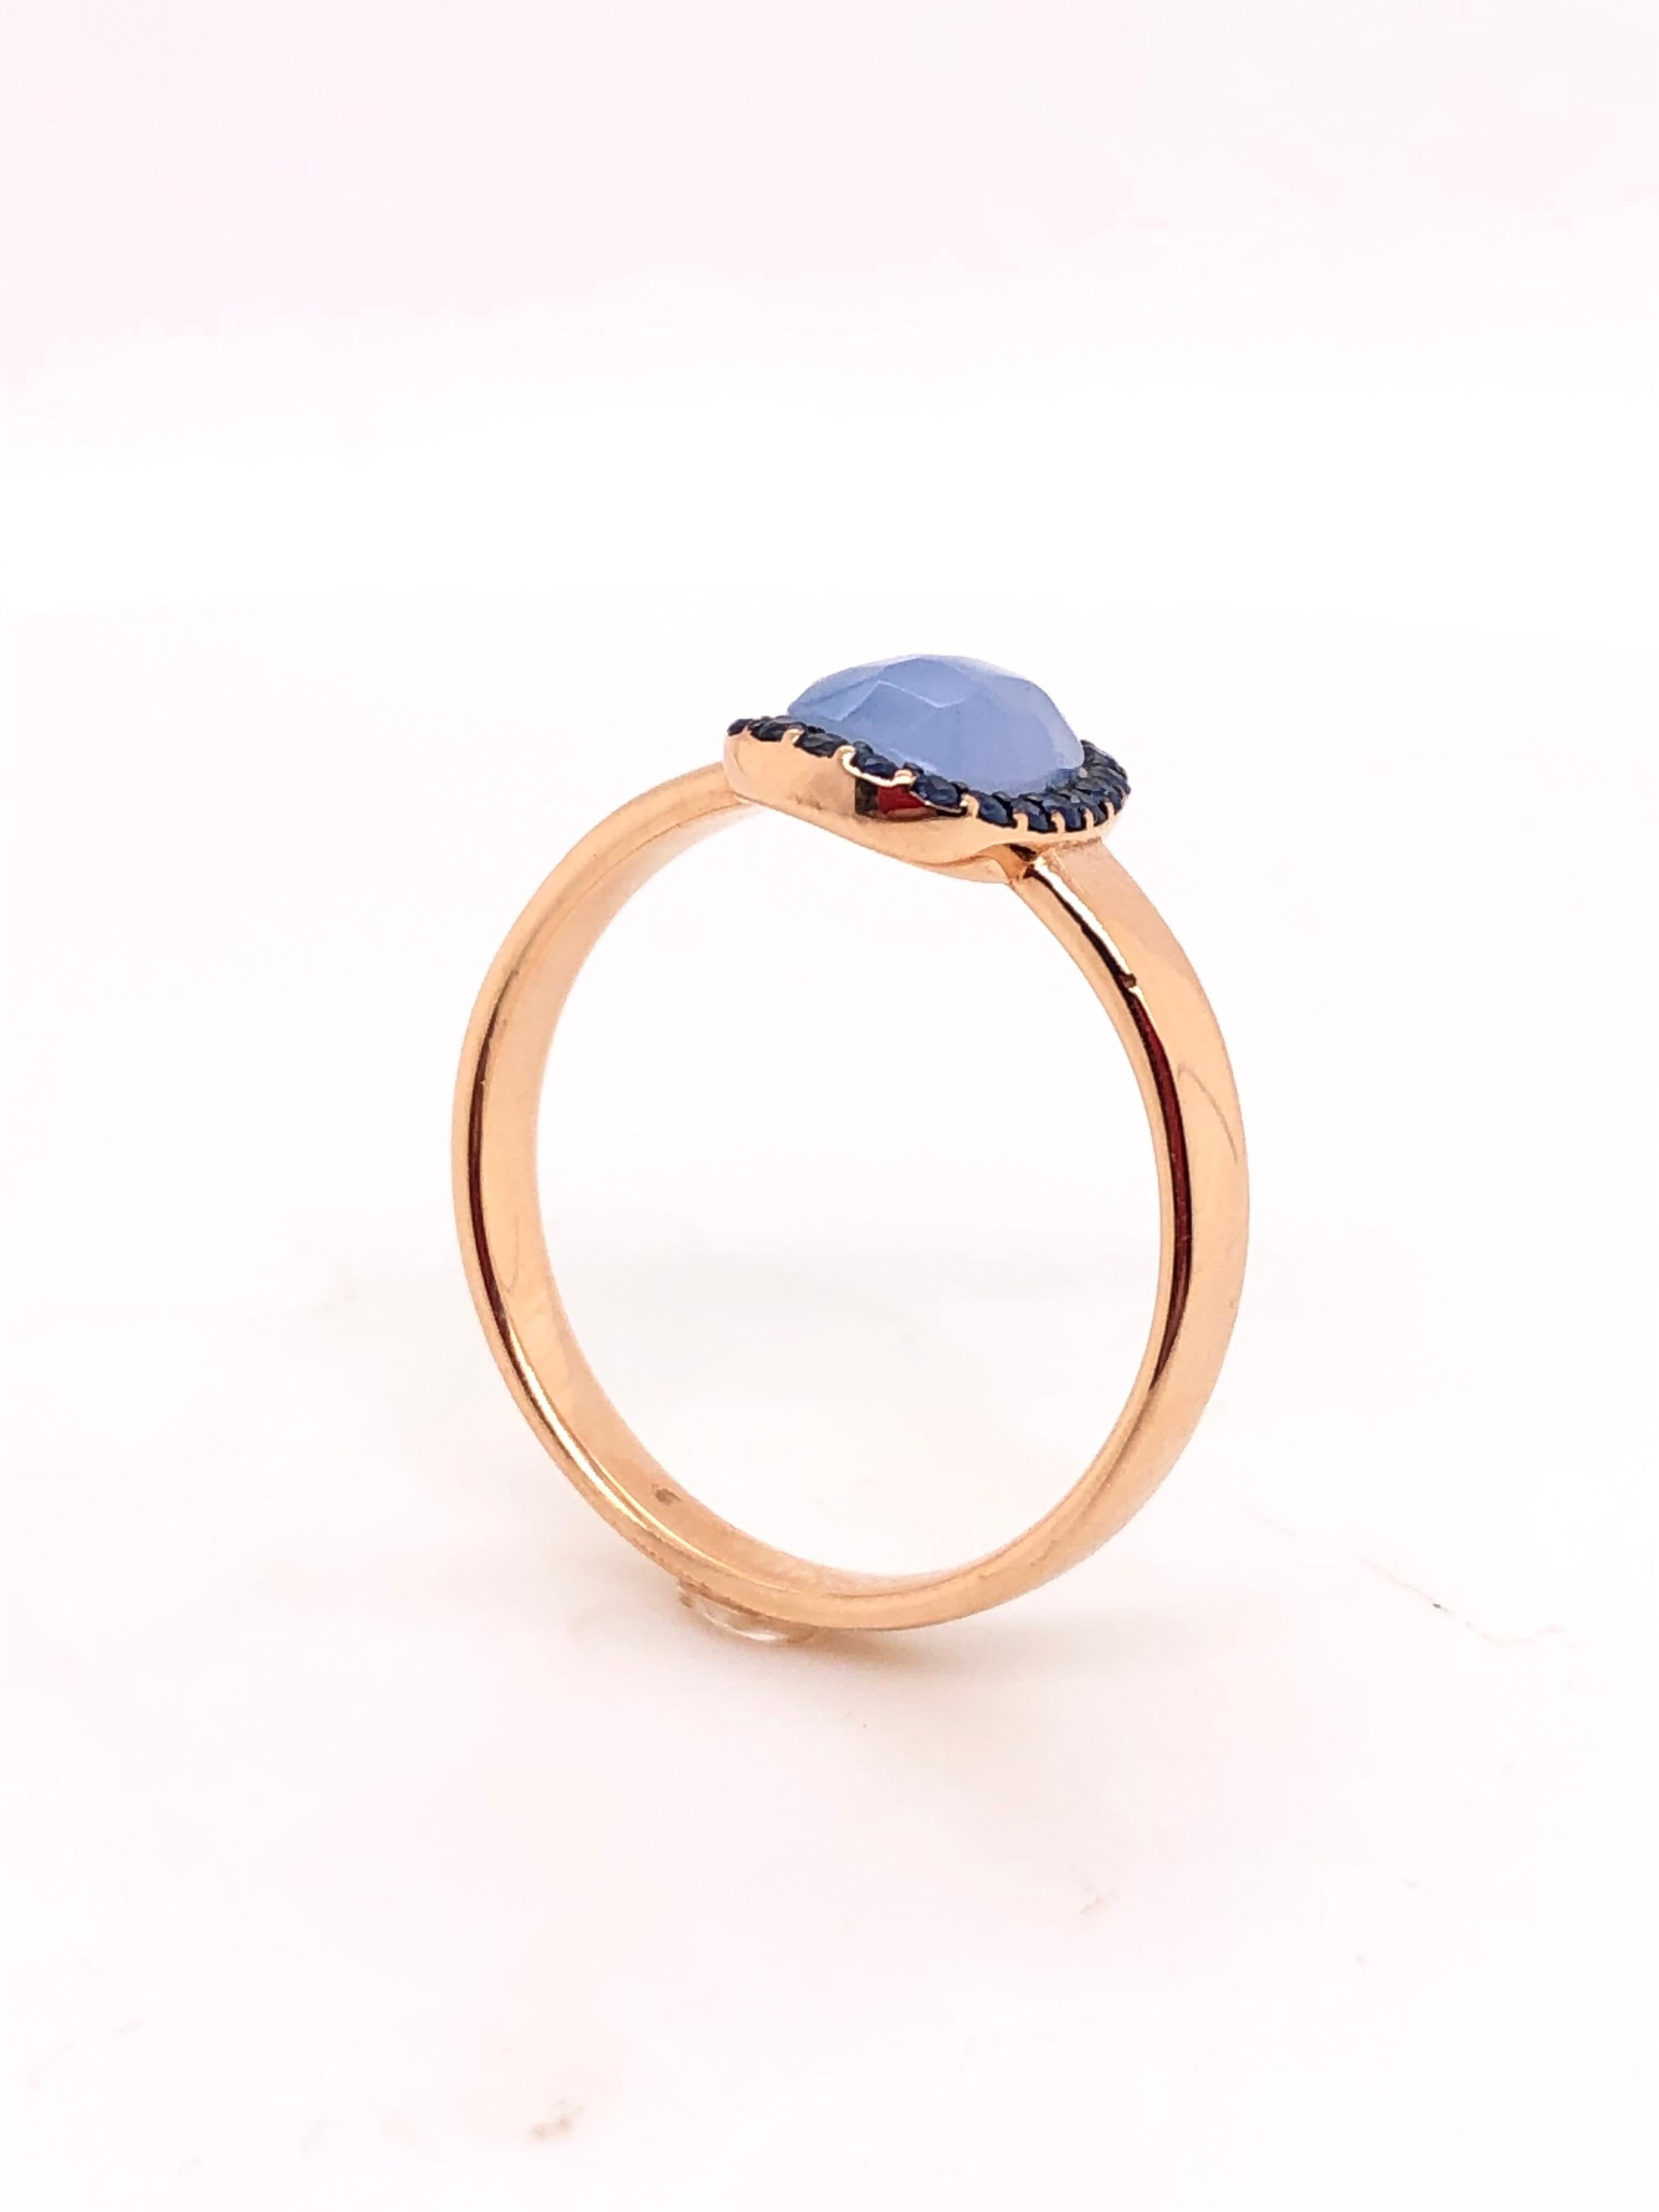 Contemporary Chalcedony and Blue Sapphire on Rose Gold 18 Karat Ring